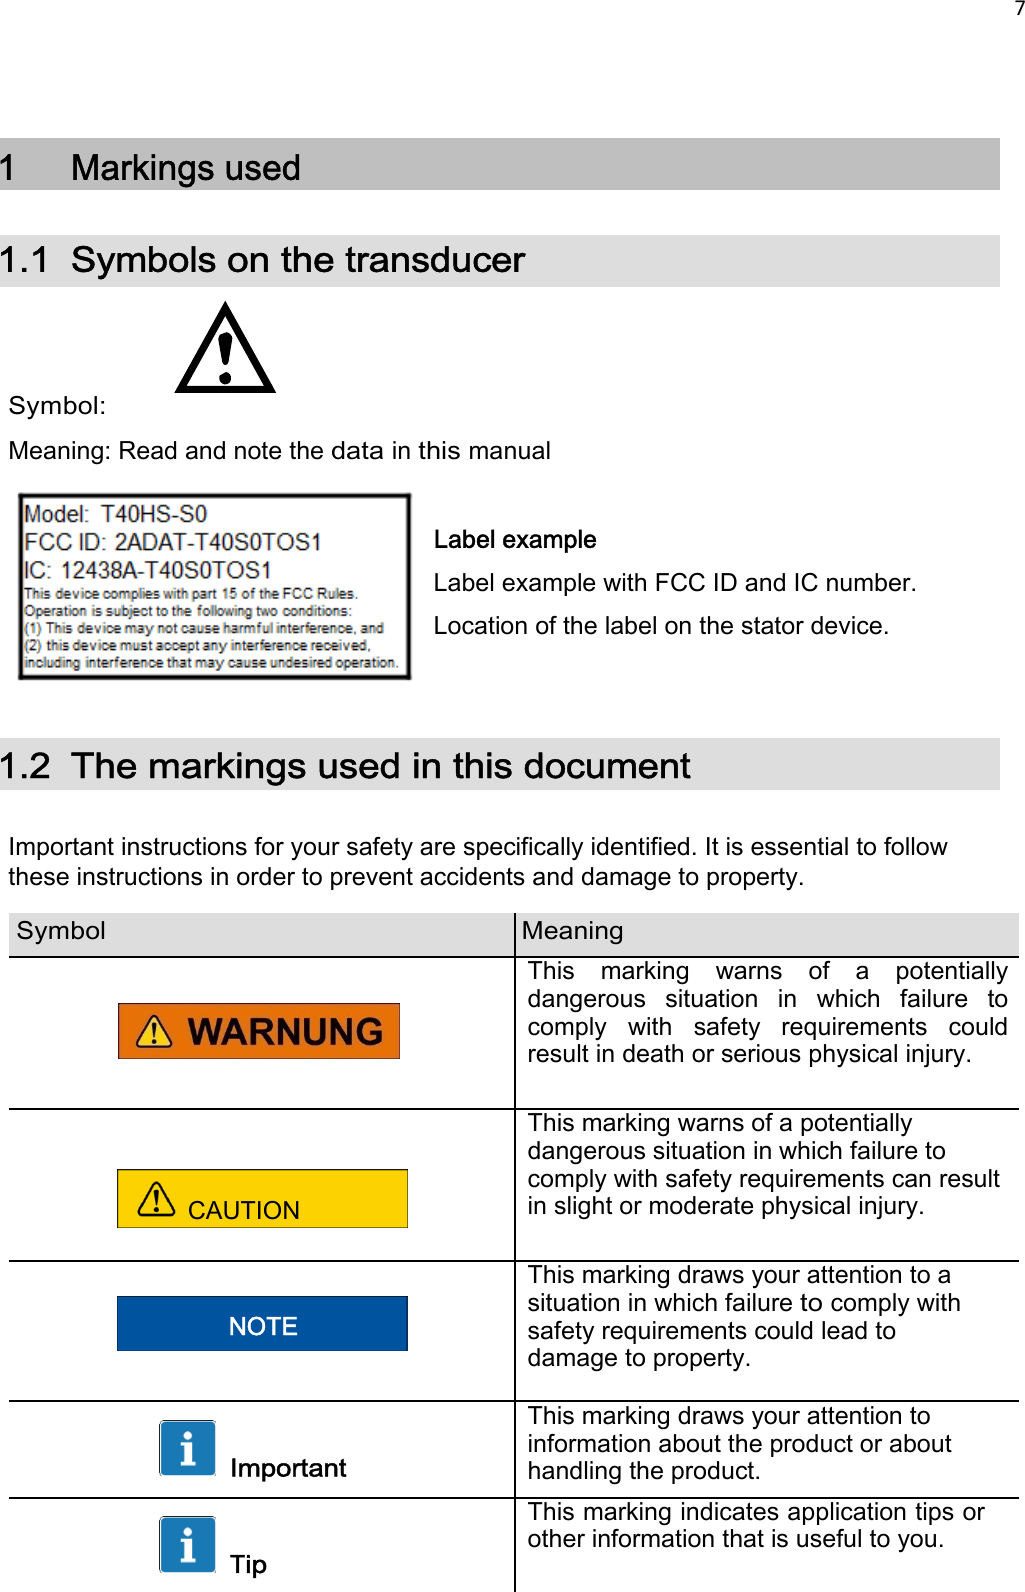 7     1  Markings used 1.1 Symbols on the transducer     Symbol: Meaning: Read and note the data in this manual  Label example Label example with FCC ID and IC number.  Location of the label on the stator device.   1.2  The markings used in this document  Important instructions for your safety are specifically identified. It is essential to follow these instructions in order to prevent accidents and damage to property.  Symbol Meaning      This  marking  warns  of  a  potentially dangerous  situation  in  which  failure  to comply  with  safety  requirements  could result in death or serious physical injury.  CAUTION This marking warns of a potentially dangerous situation in which failure to comply with safety requirements can result in slight or moderate physical injury.   NOTE This marking draws your attention to a situation in which failure to comply with safety requirements could lead to damage to property.   Important This marking draws your attention to information about the product or about handling the product.   Tip This marking indicates application tips or other information that is useful to you.  